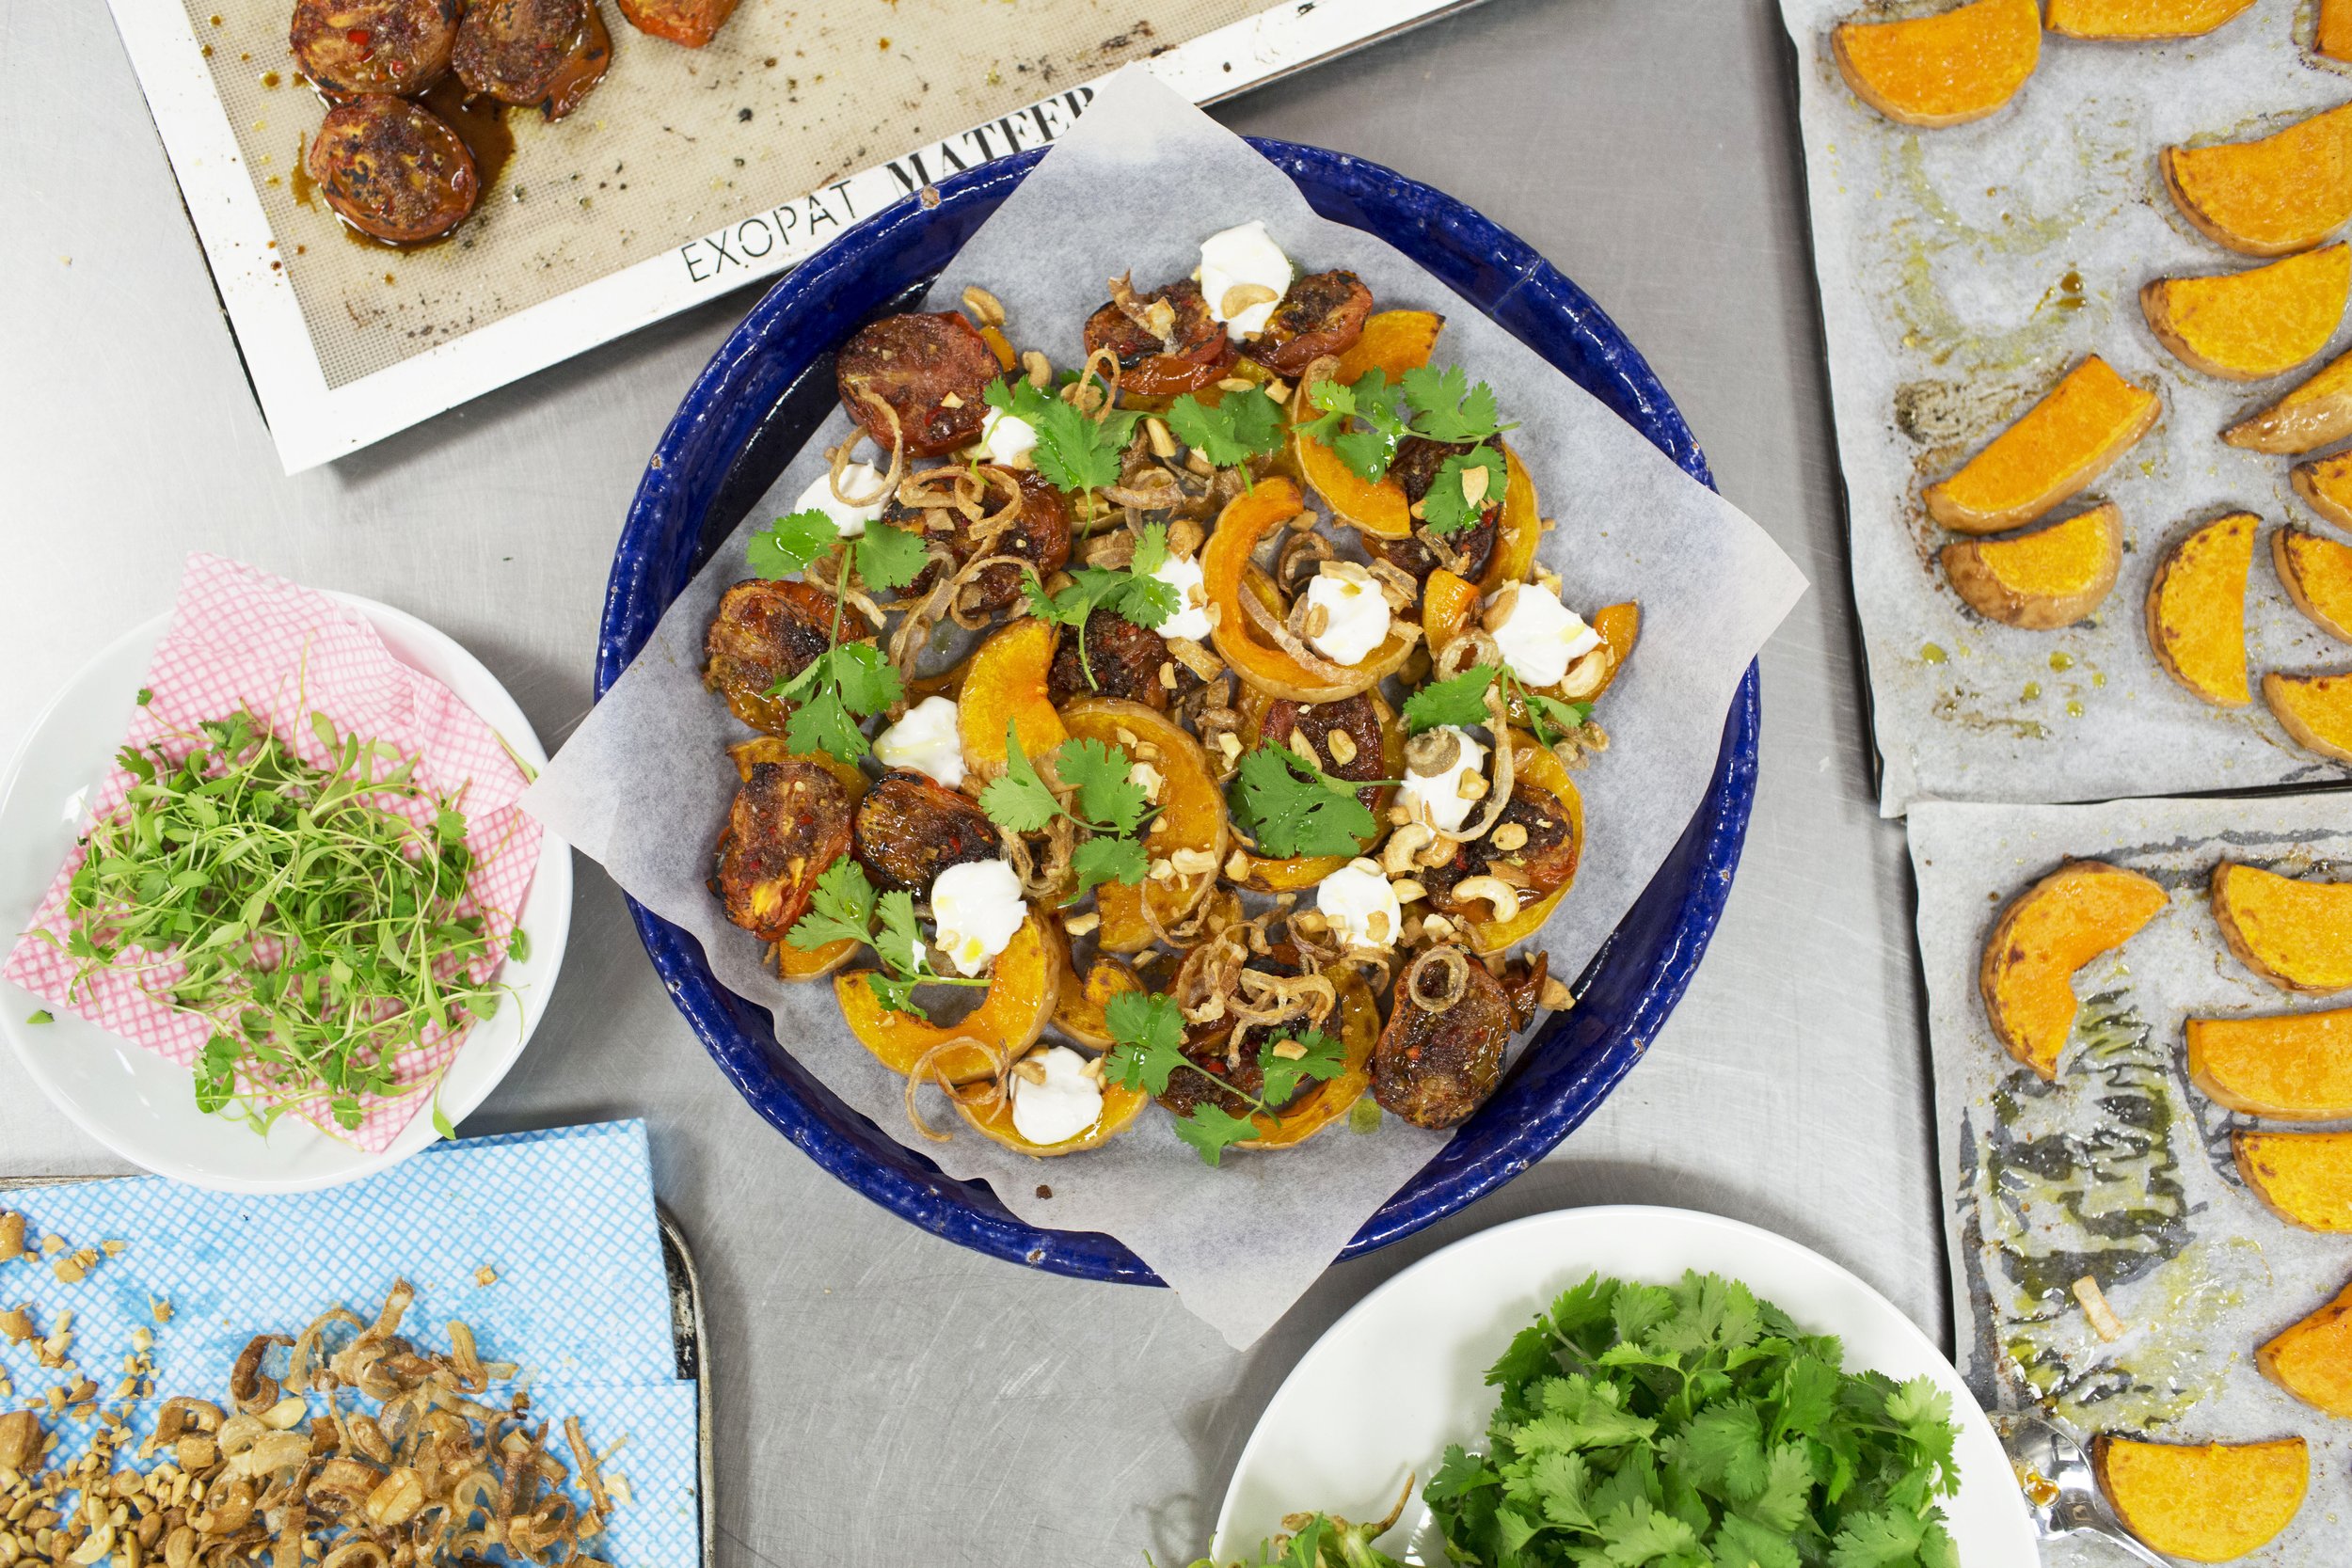  Food by Yotam Ottolenghi 